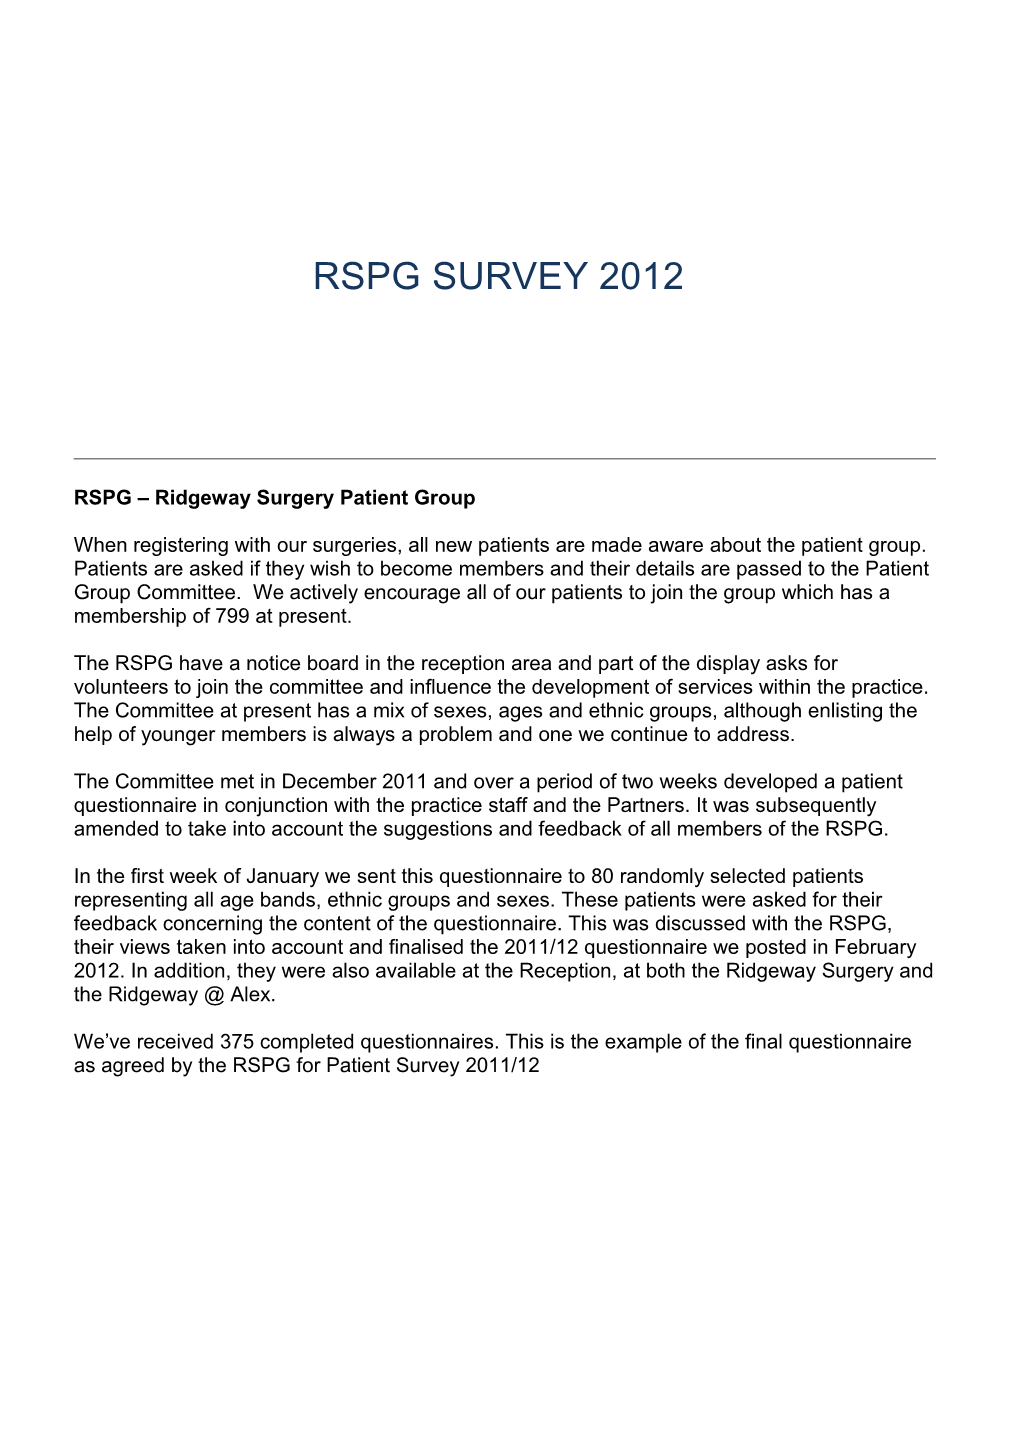 Report Following Feedback from Patient Association Questionnaire 2012 375 Returned